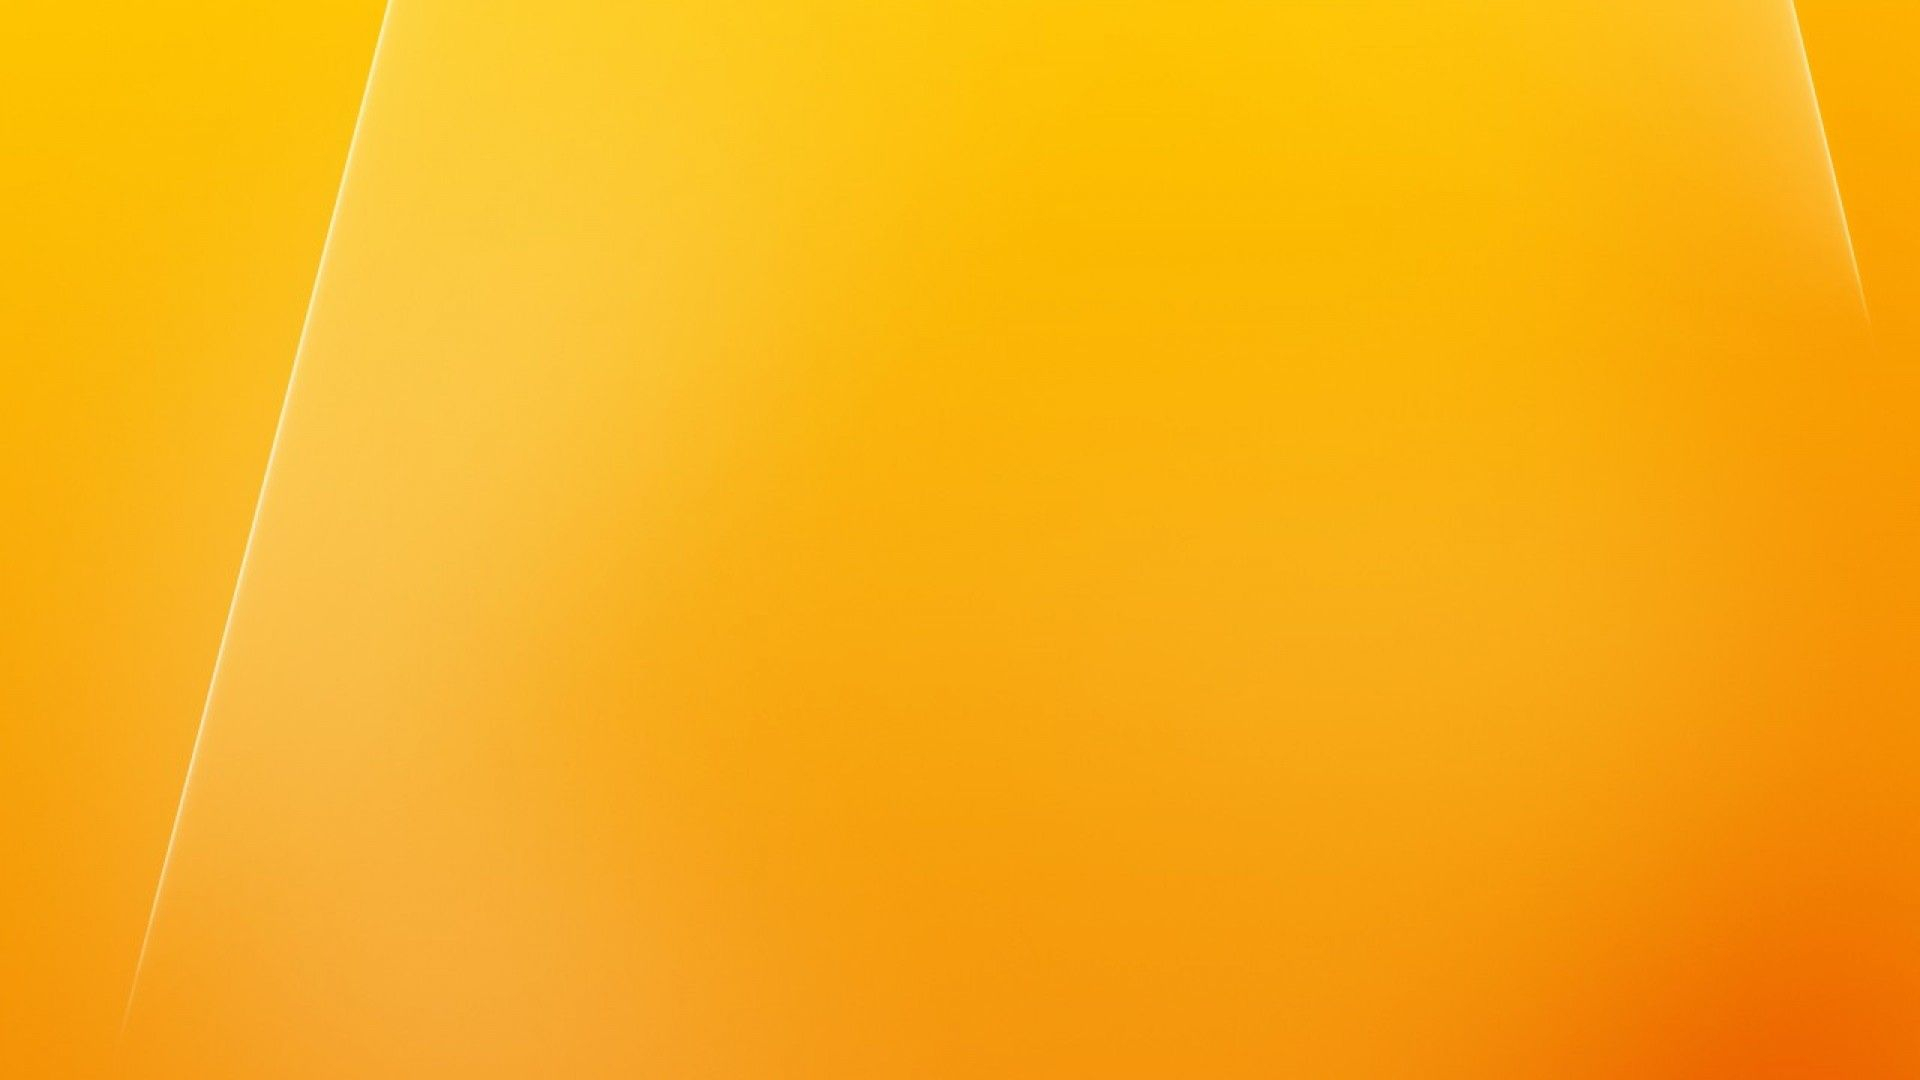 1920x1080 Orange and Yellow Wallpapers Top Free Orange and Yellow Backgrounds